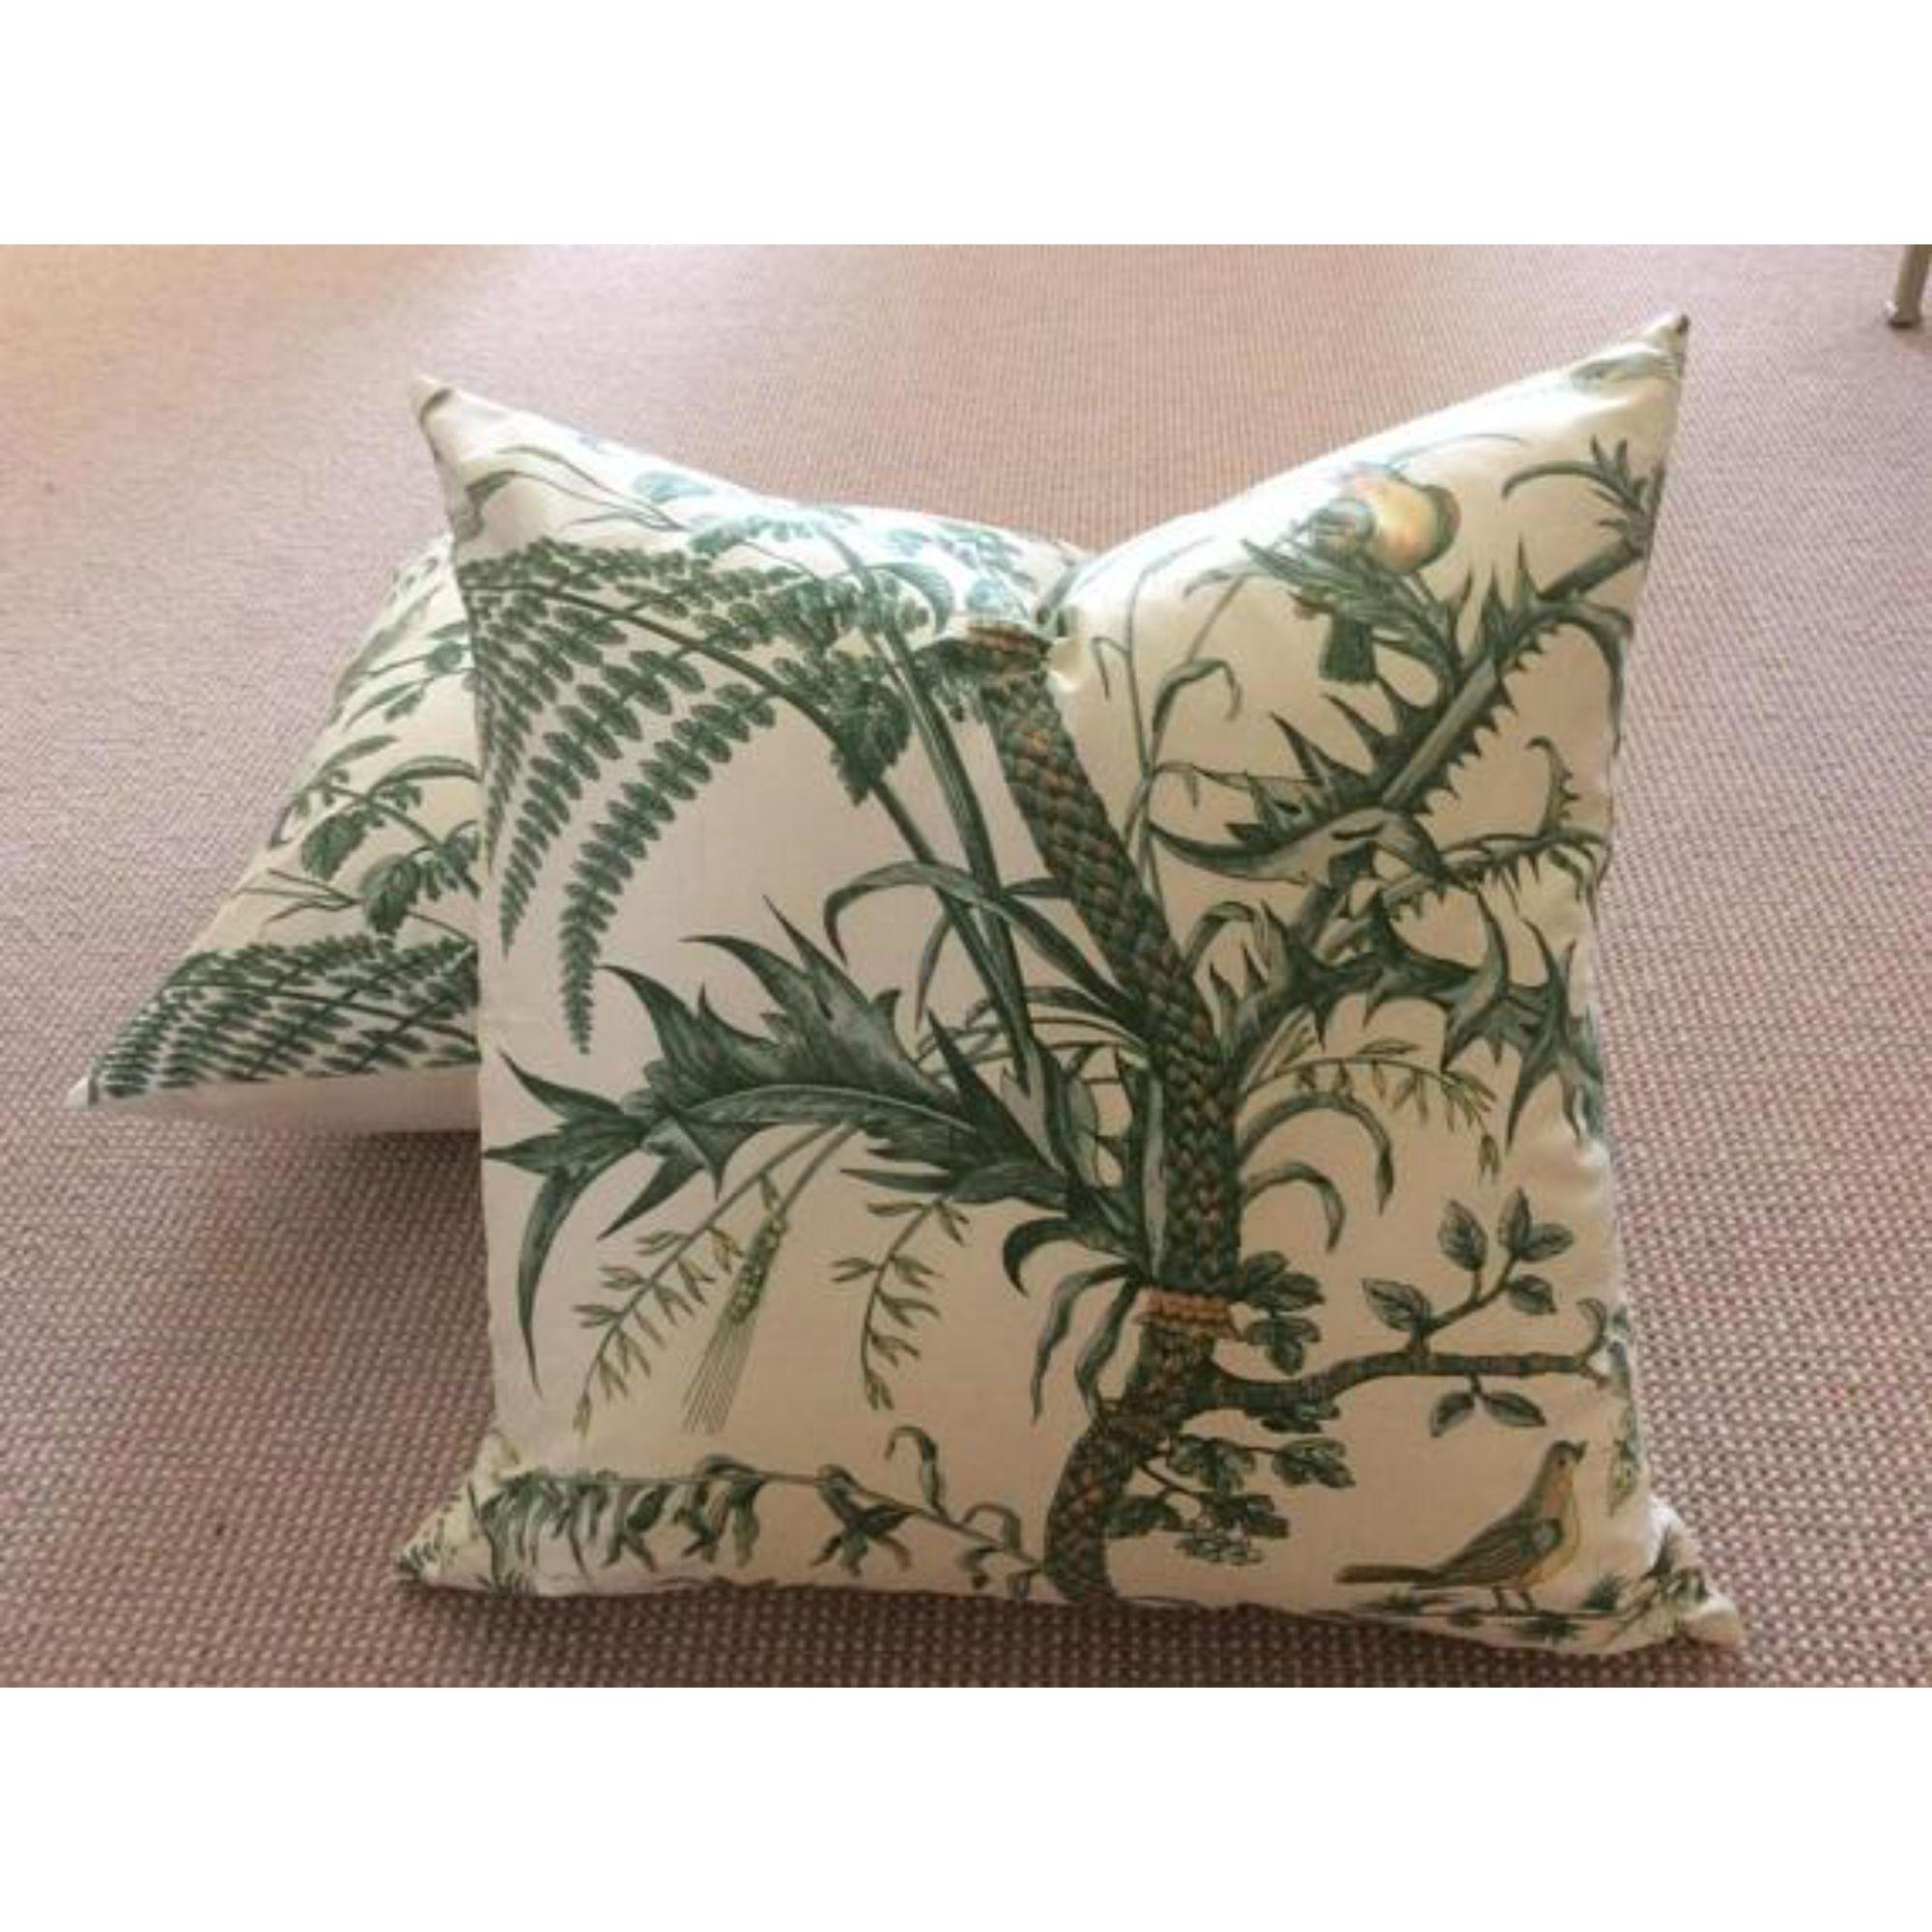 Textile Brunschwig & Fils Bird and Thistle Green Pillow Covers - a Pair For Sale